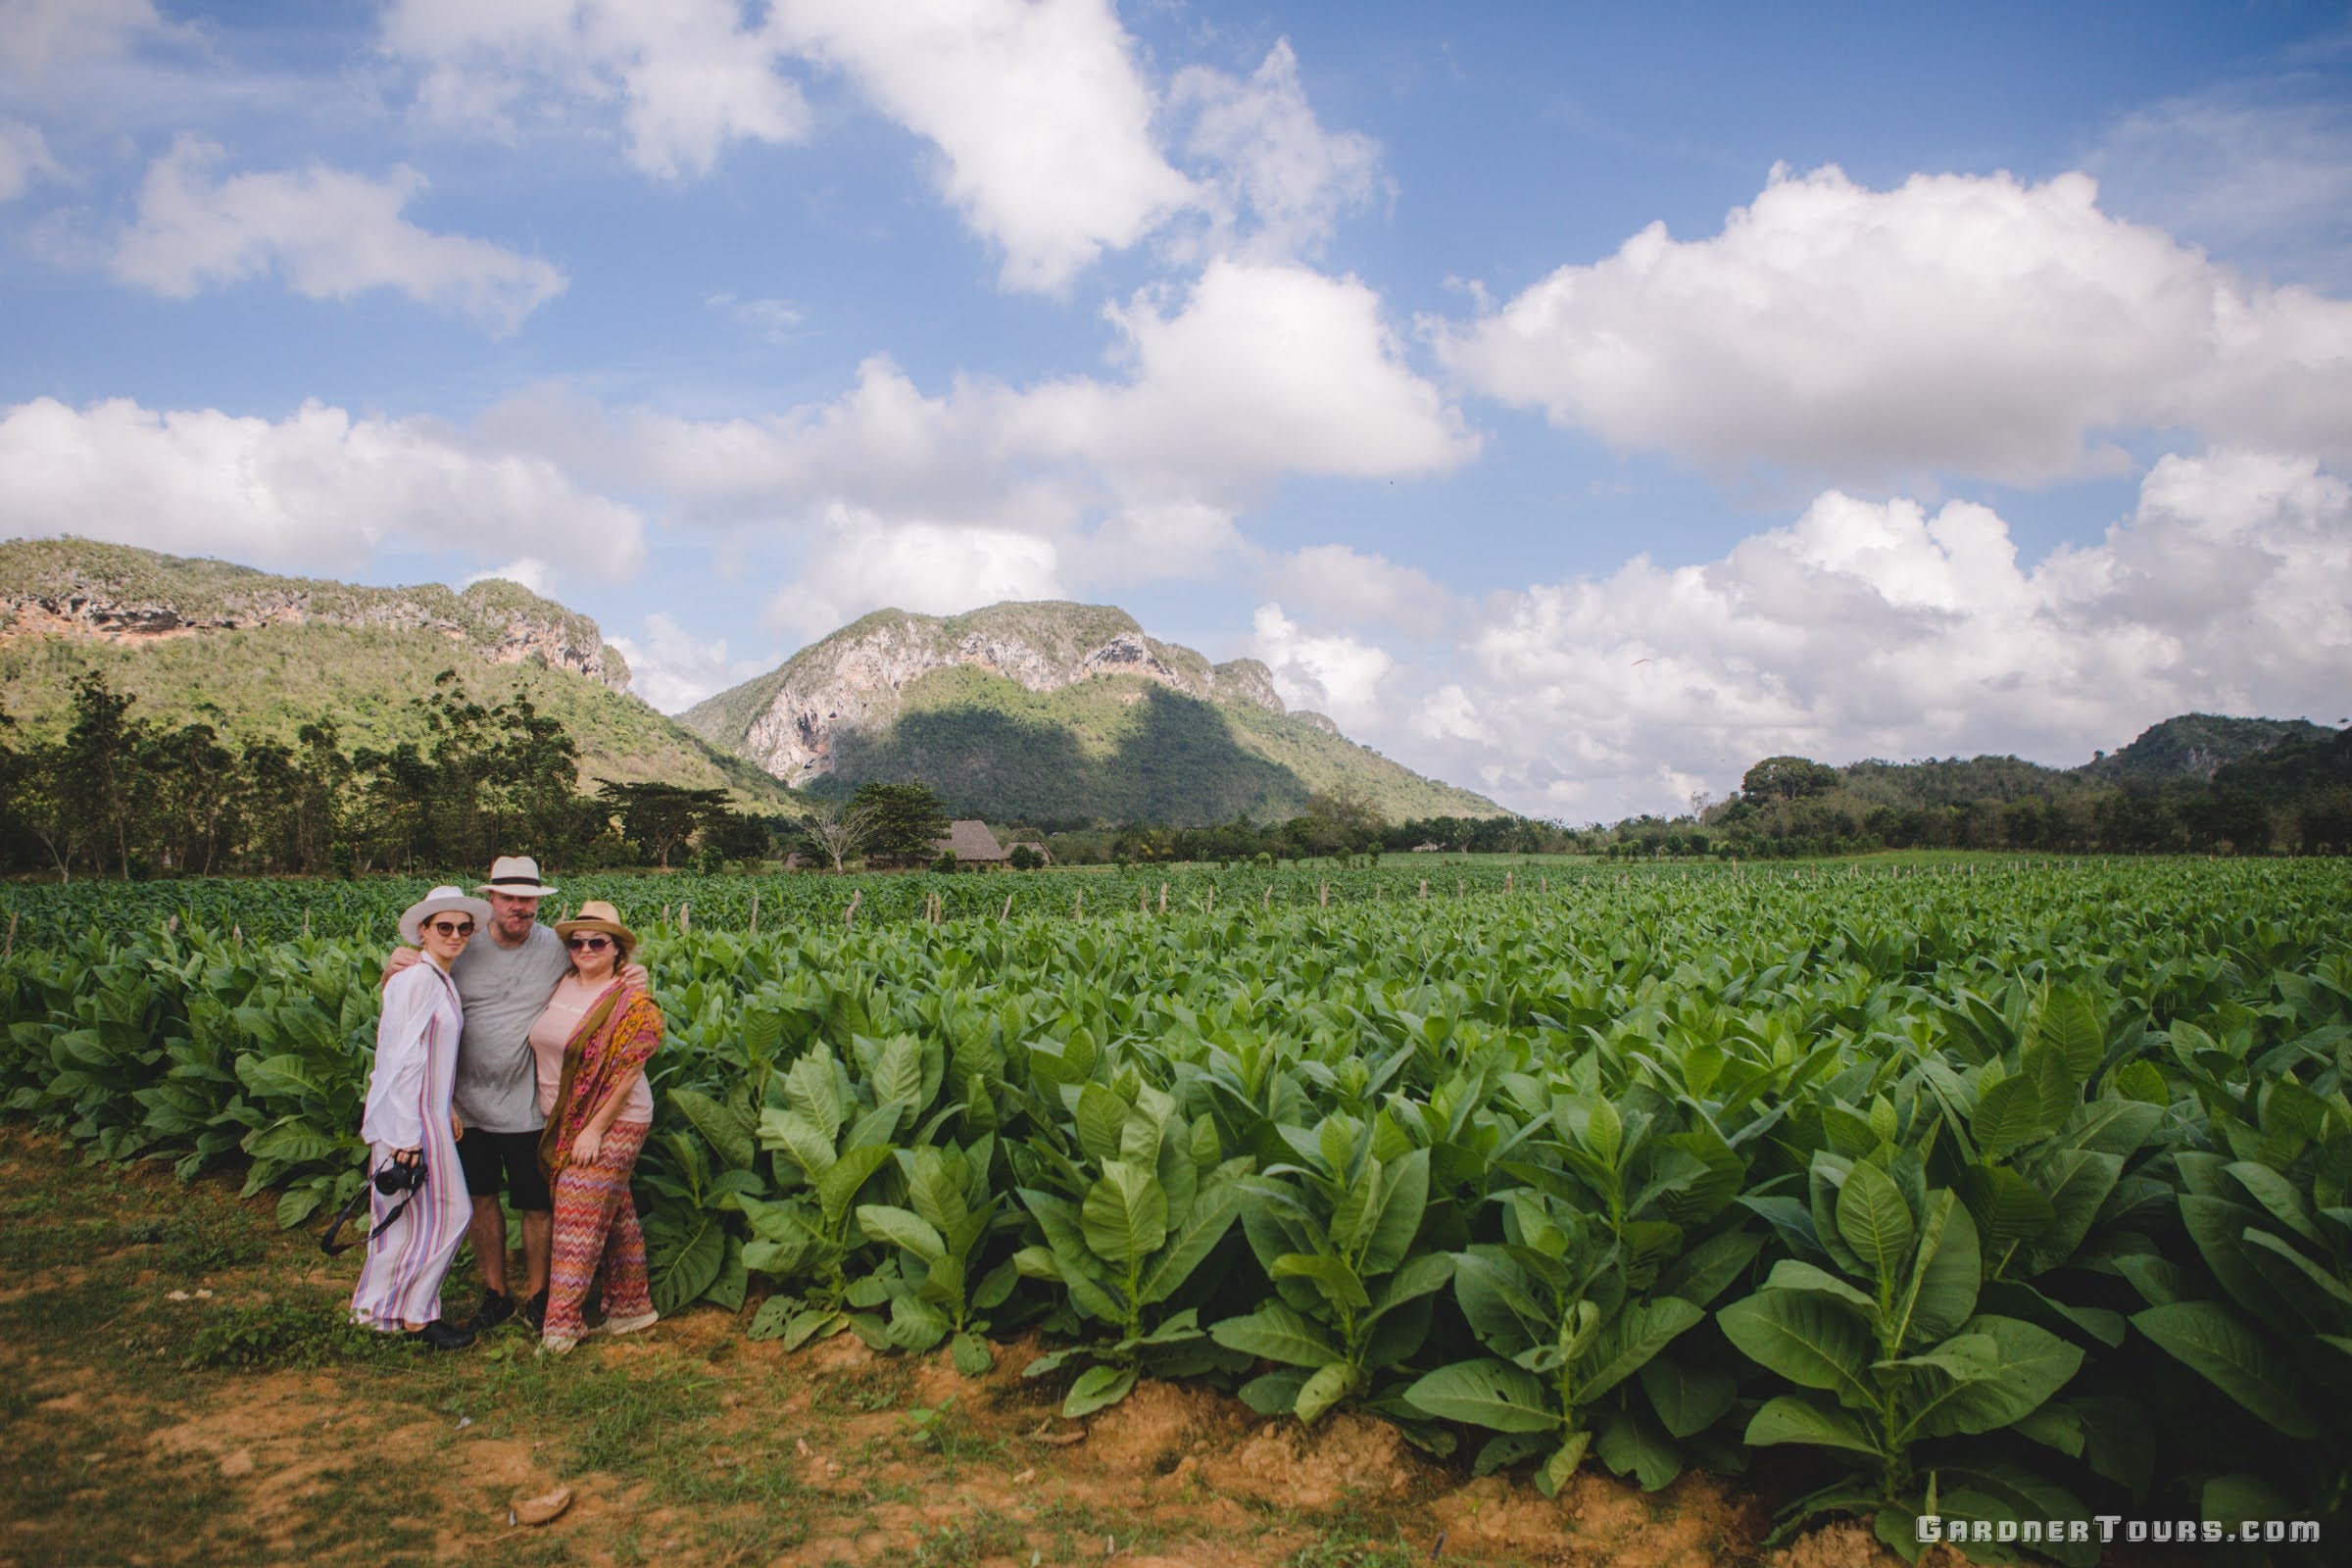 A Family of Three Standing in a Tobacco Field in the Vinales Valley, Cuba